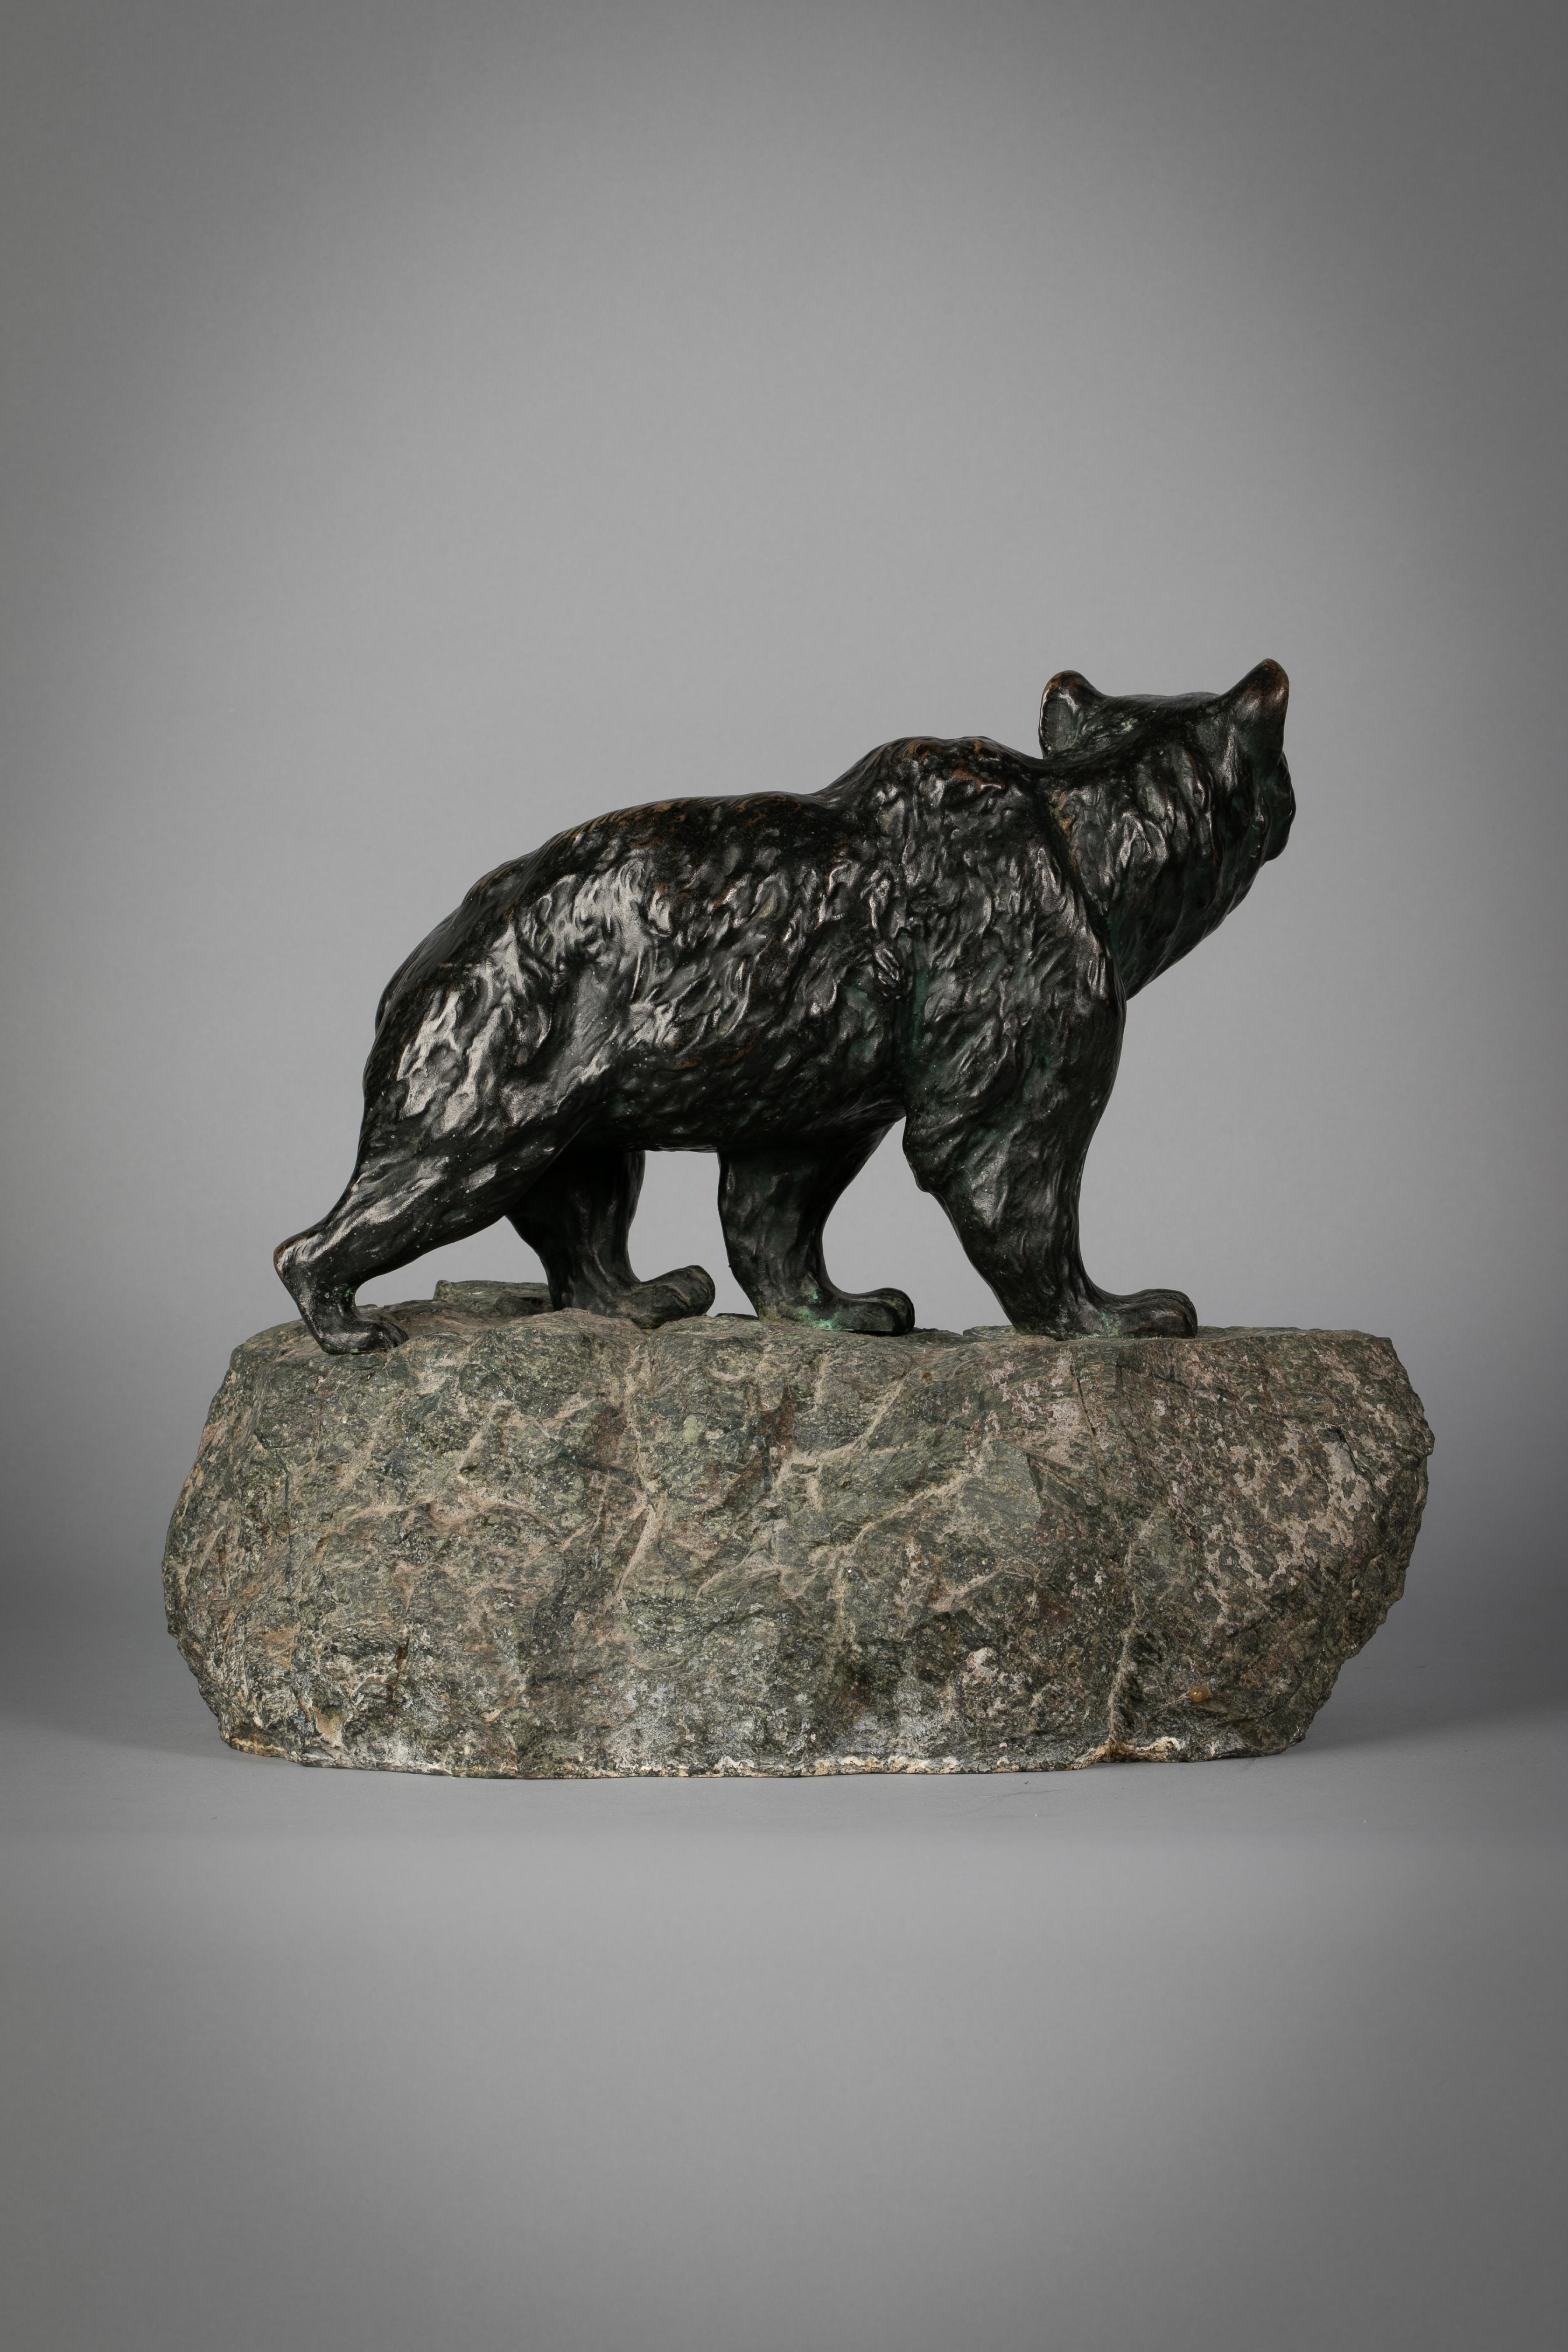 Large bronze figure of a striding bear, early 20th century on stone base.